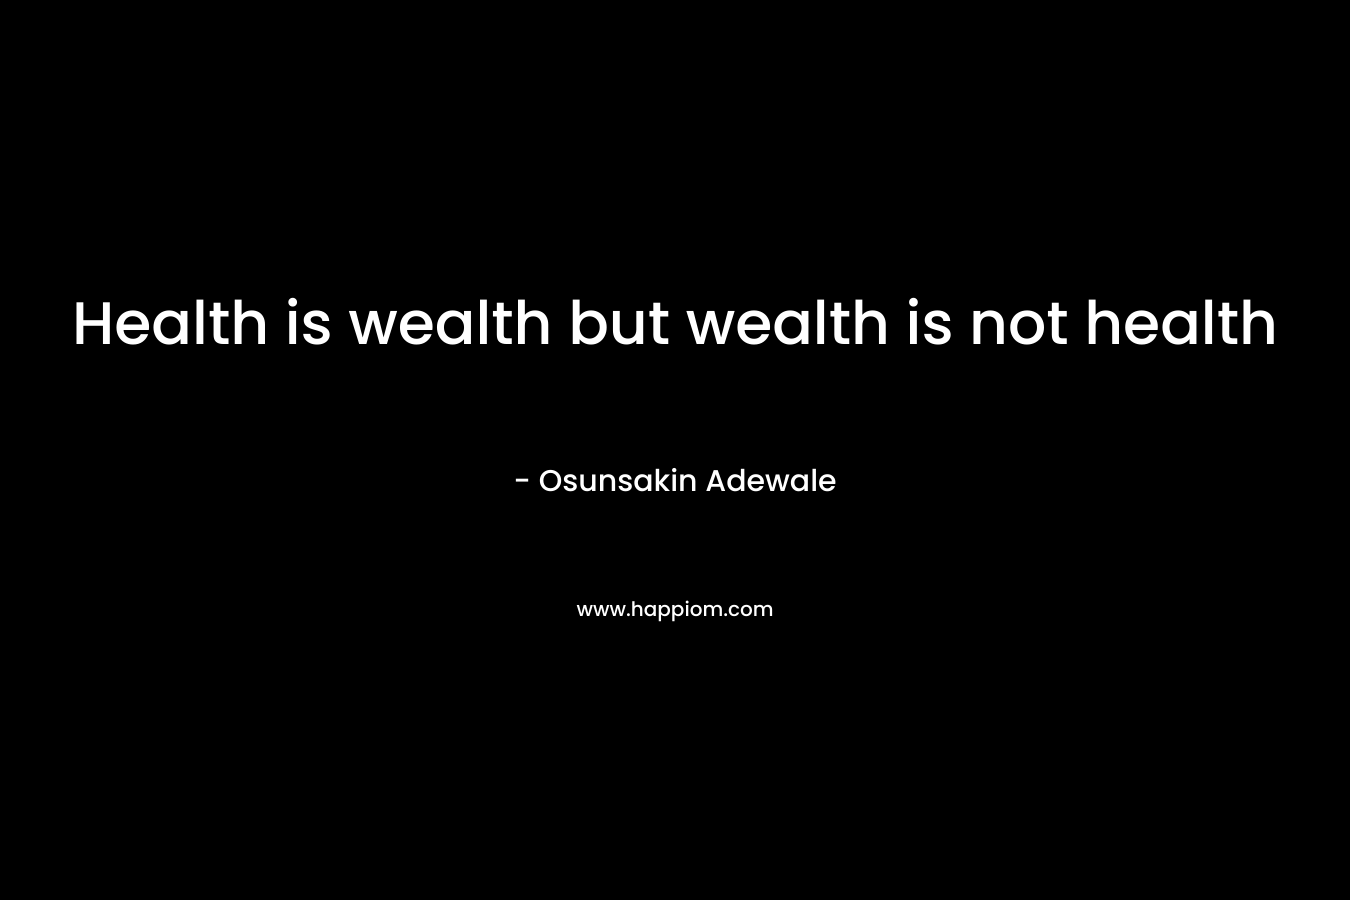 Health is wealth but wealth is not health